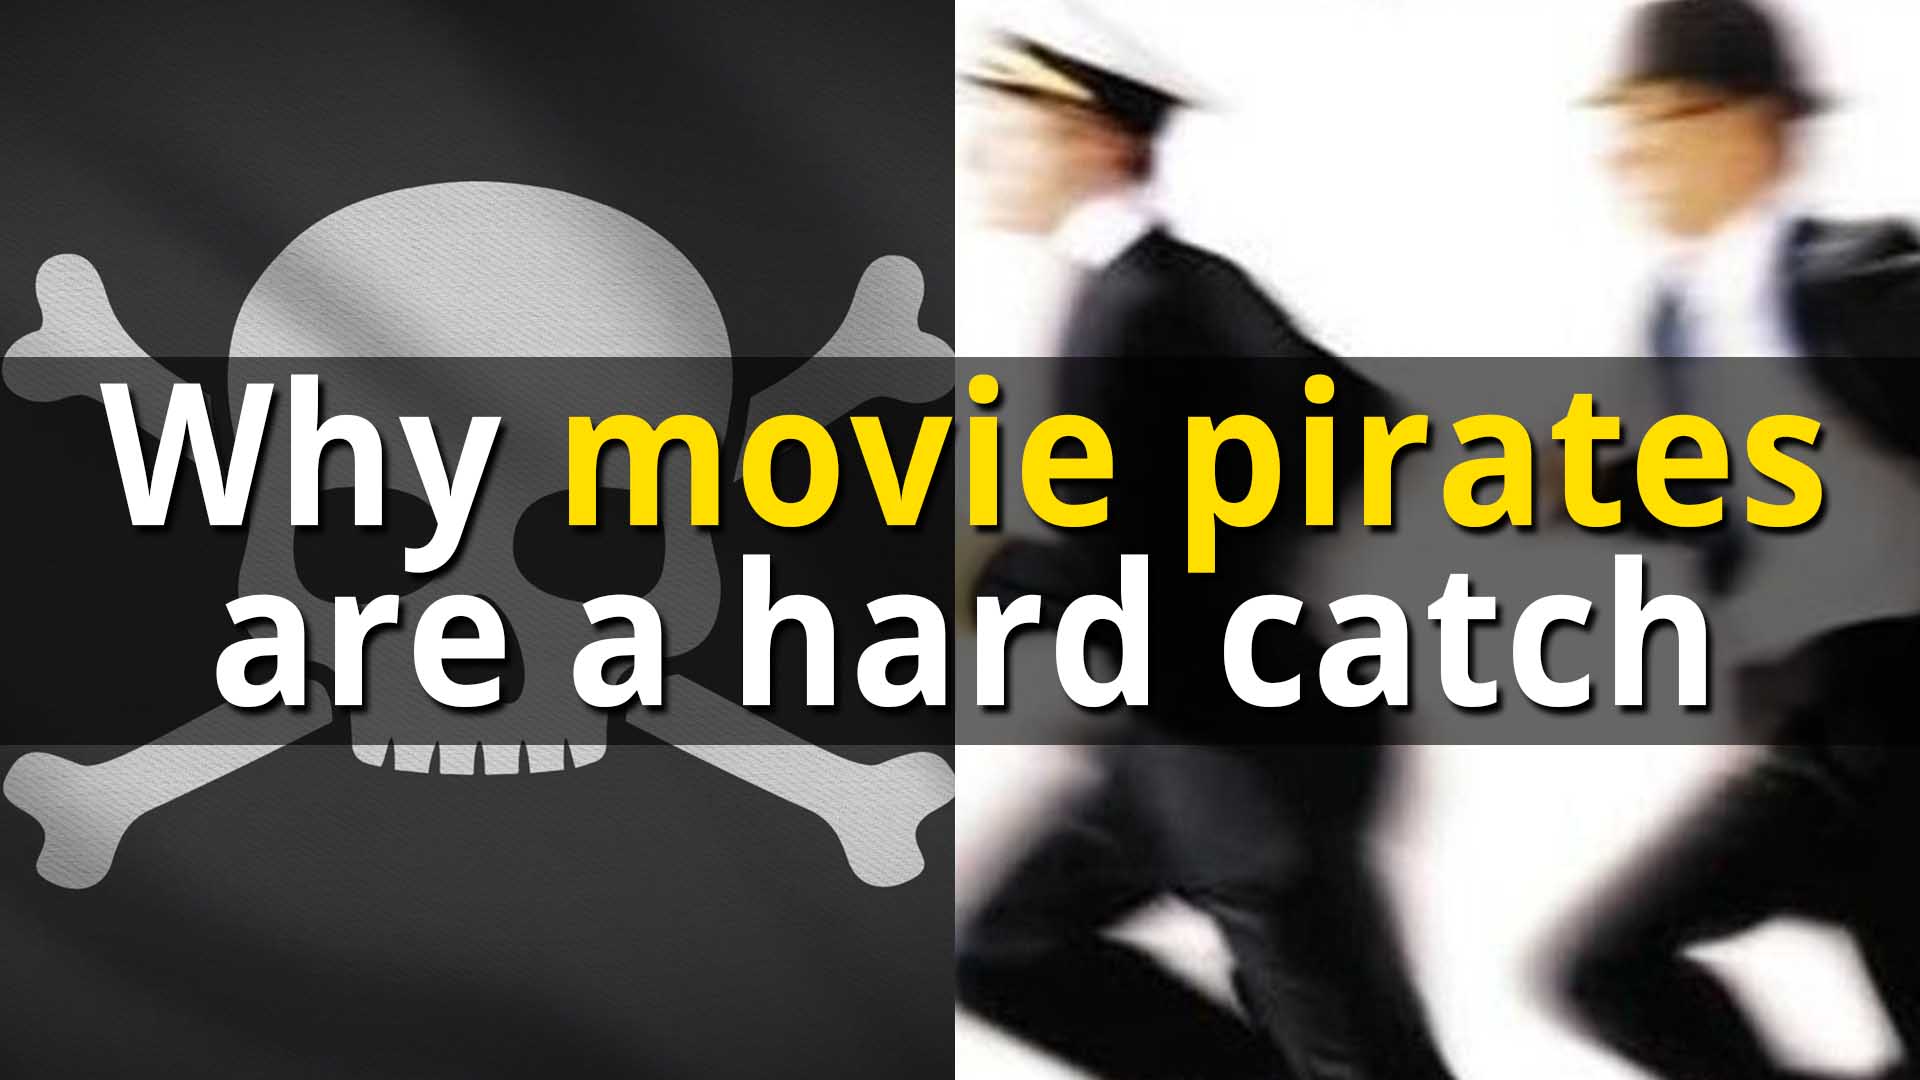 Catch me if you can: Inside the movie piracy world